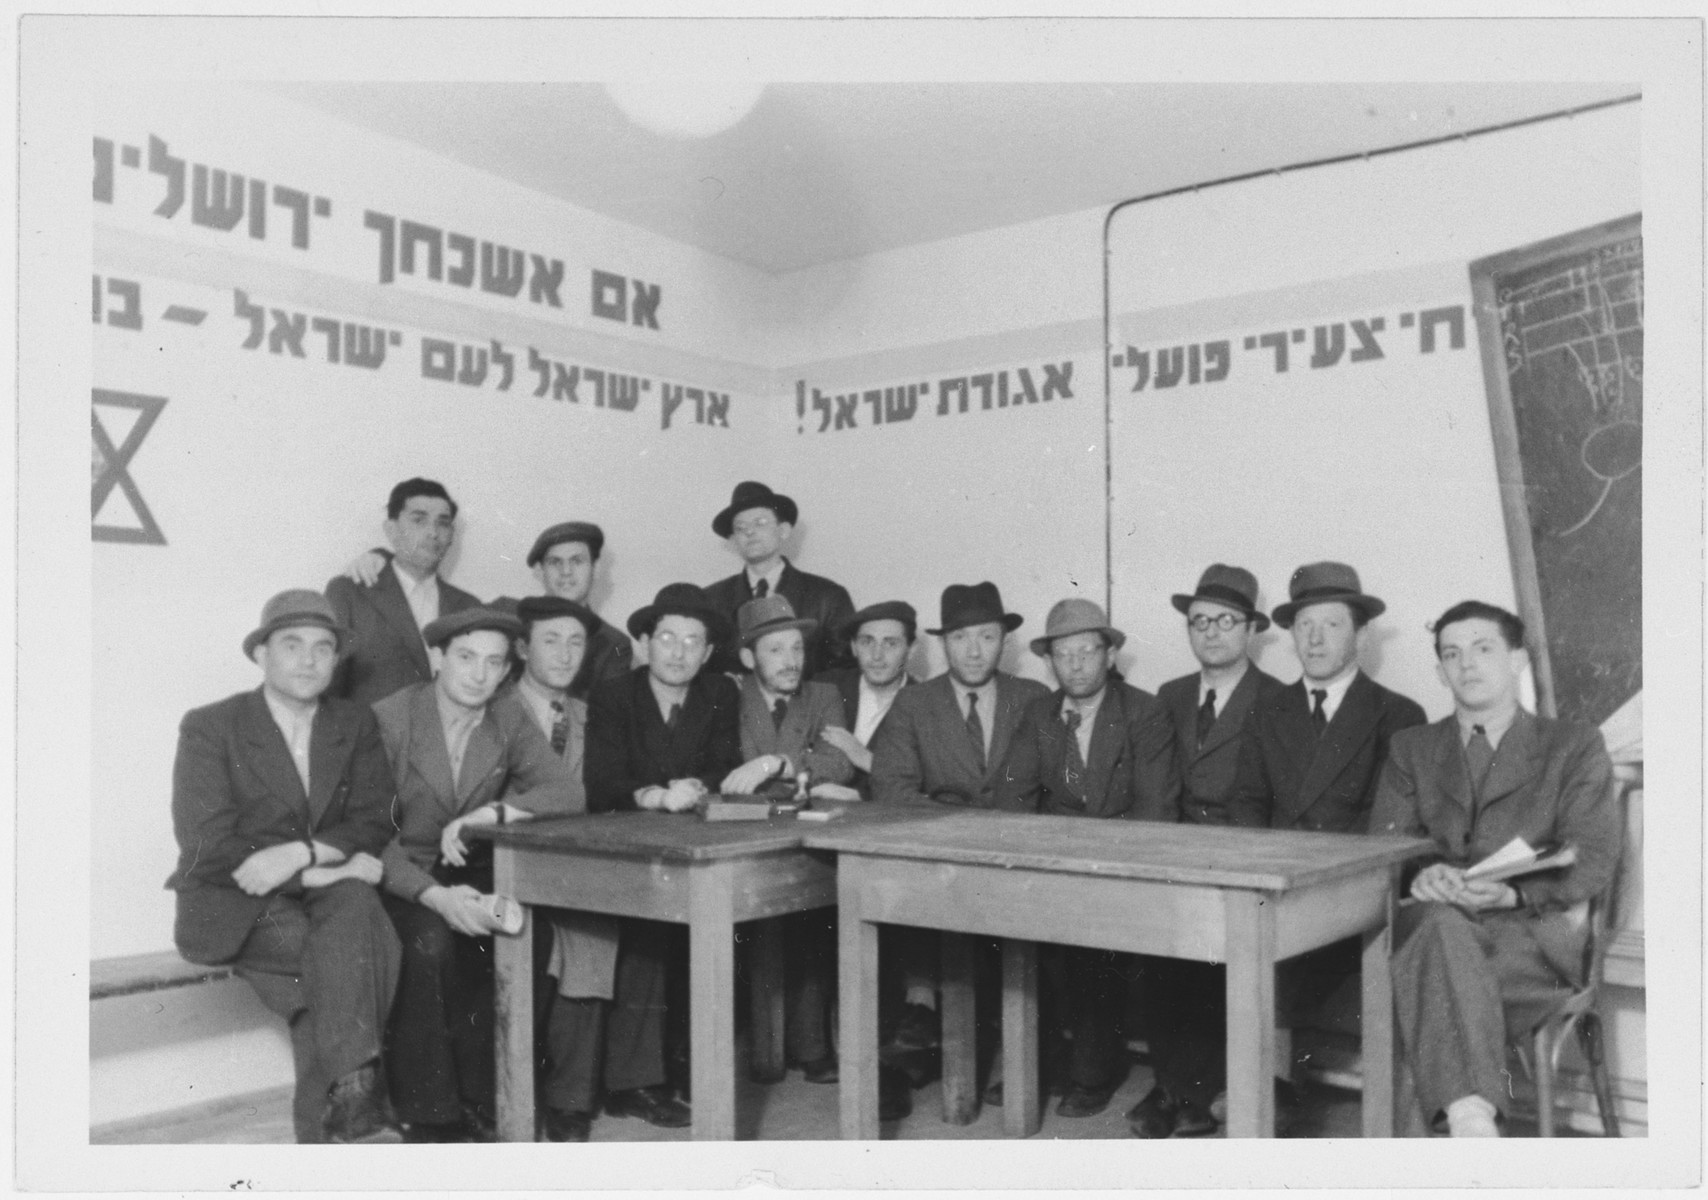 Meeting of religious Zionists in the Zeilsheim displaced persons' camp.

The walls are decorated with sayings including "If I forget thee O Jerusalem" and "the Land of Israel for the People of Israel".